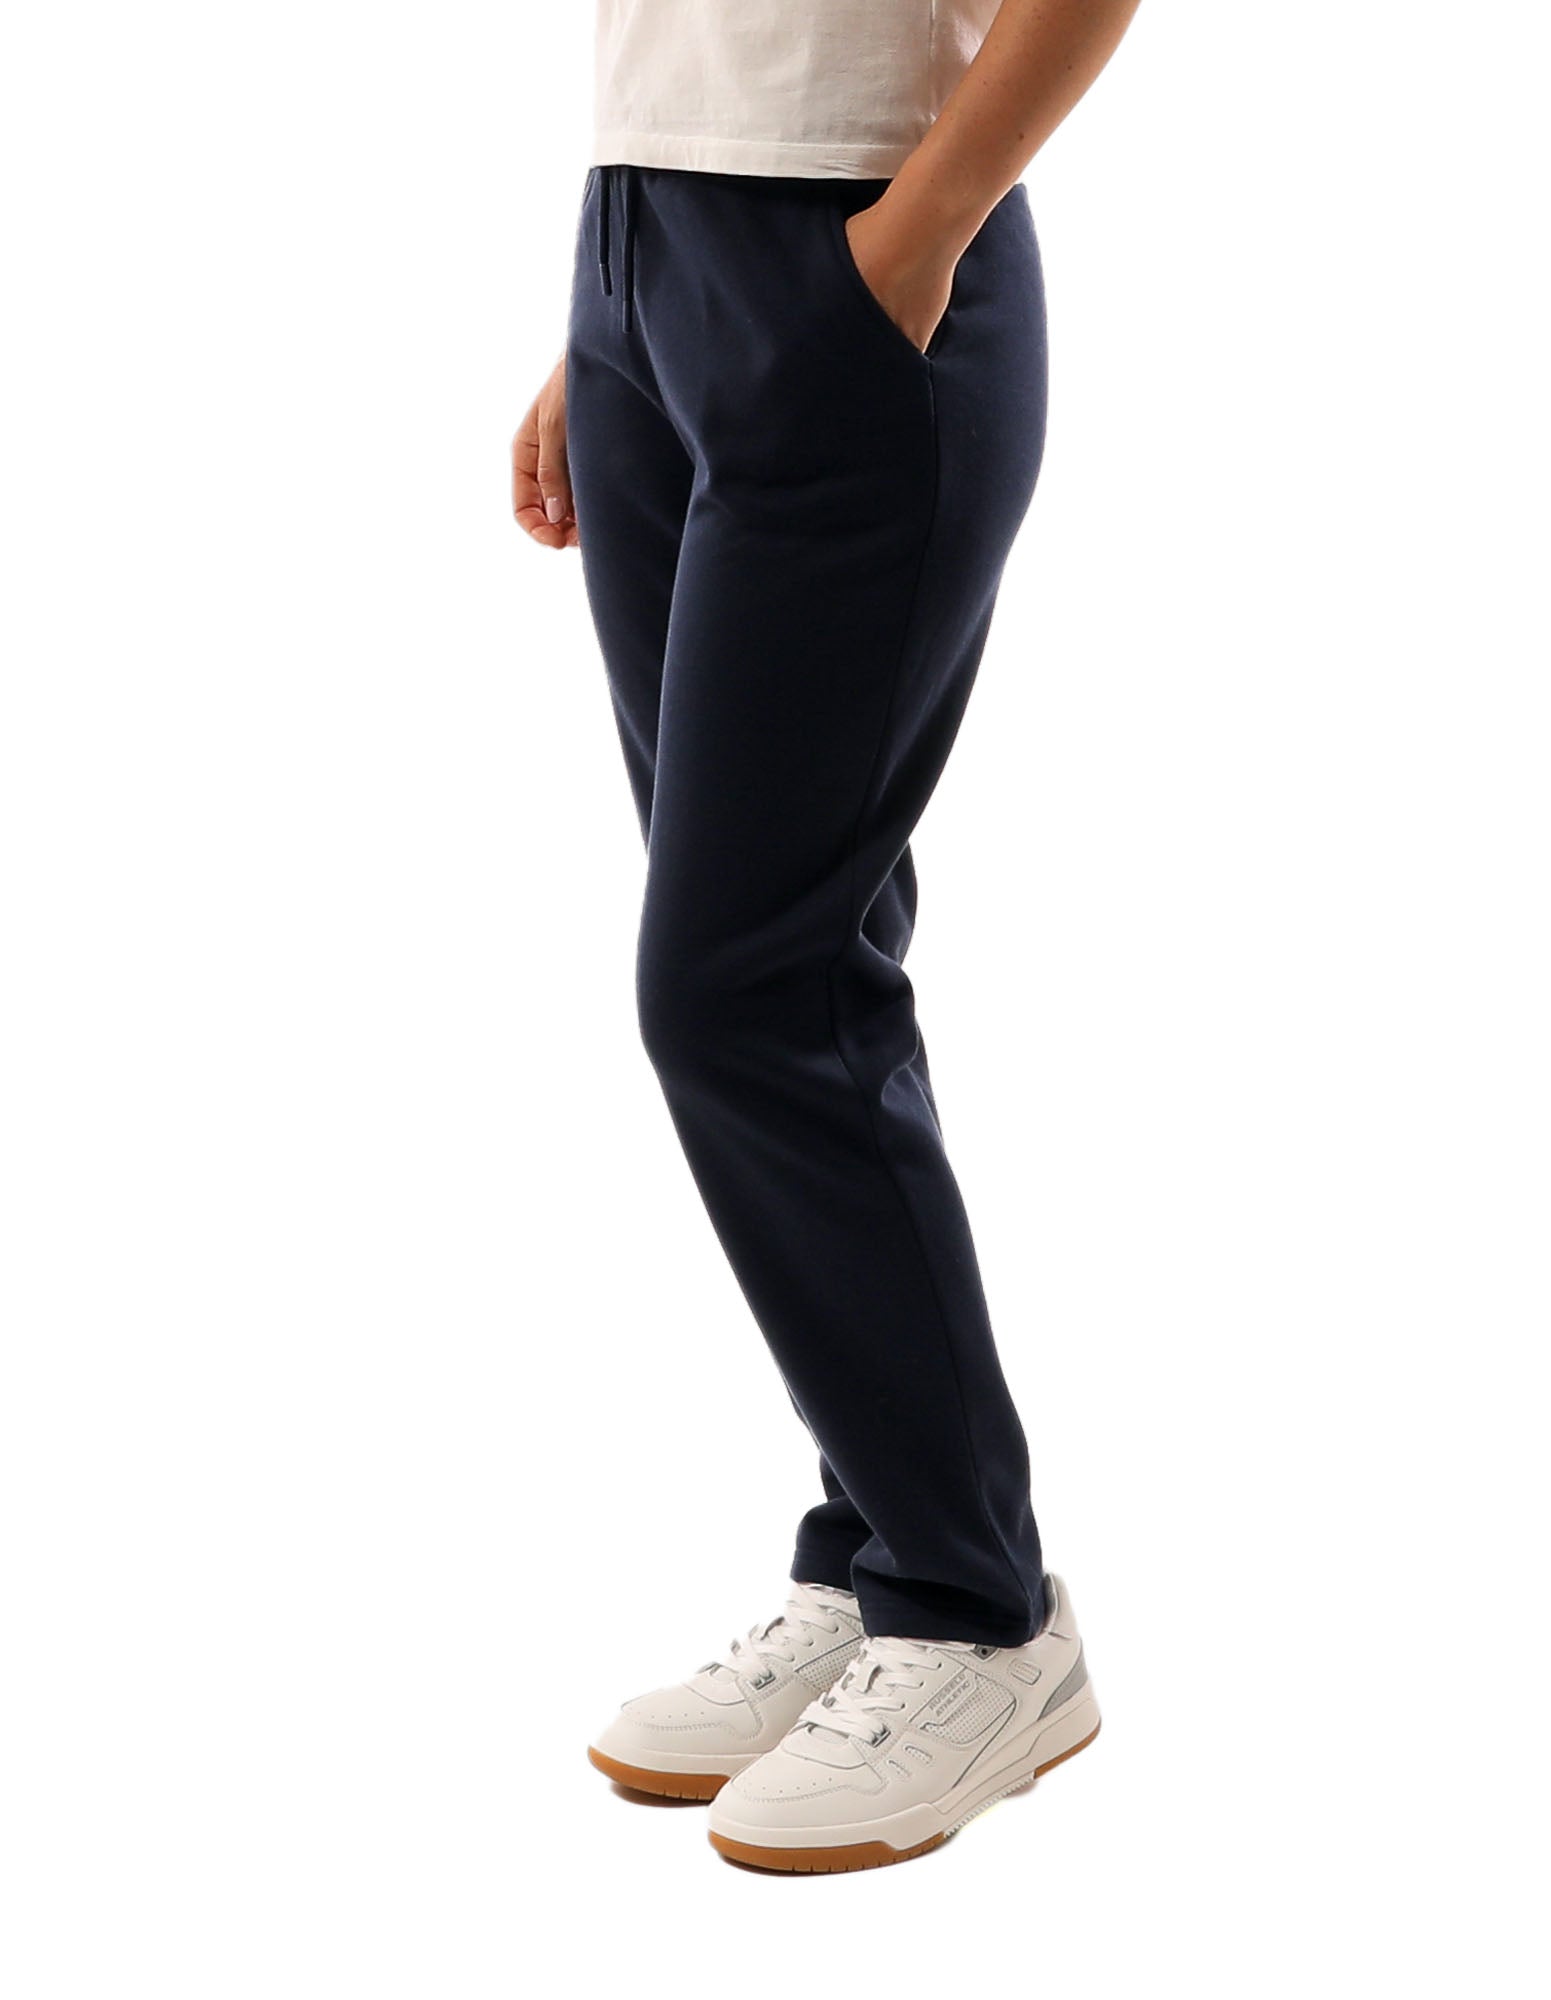 Russell Athletic Small Arch Trackpant in Blue